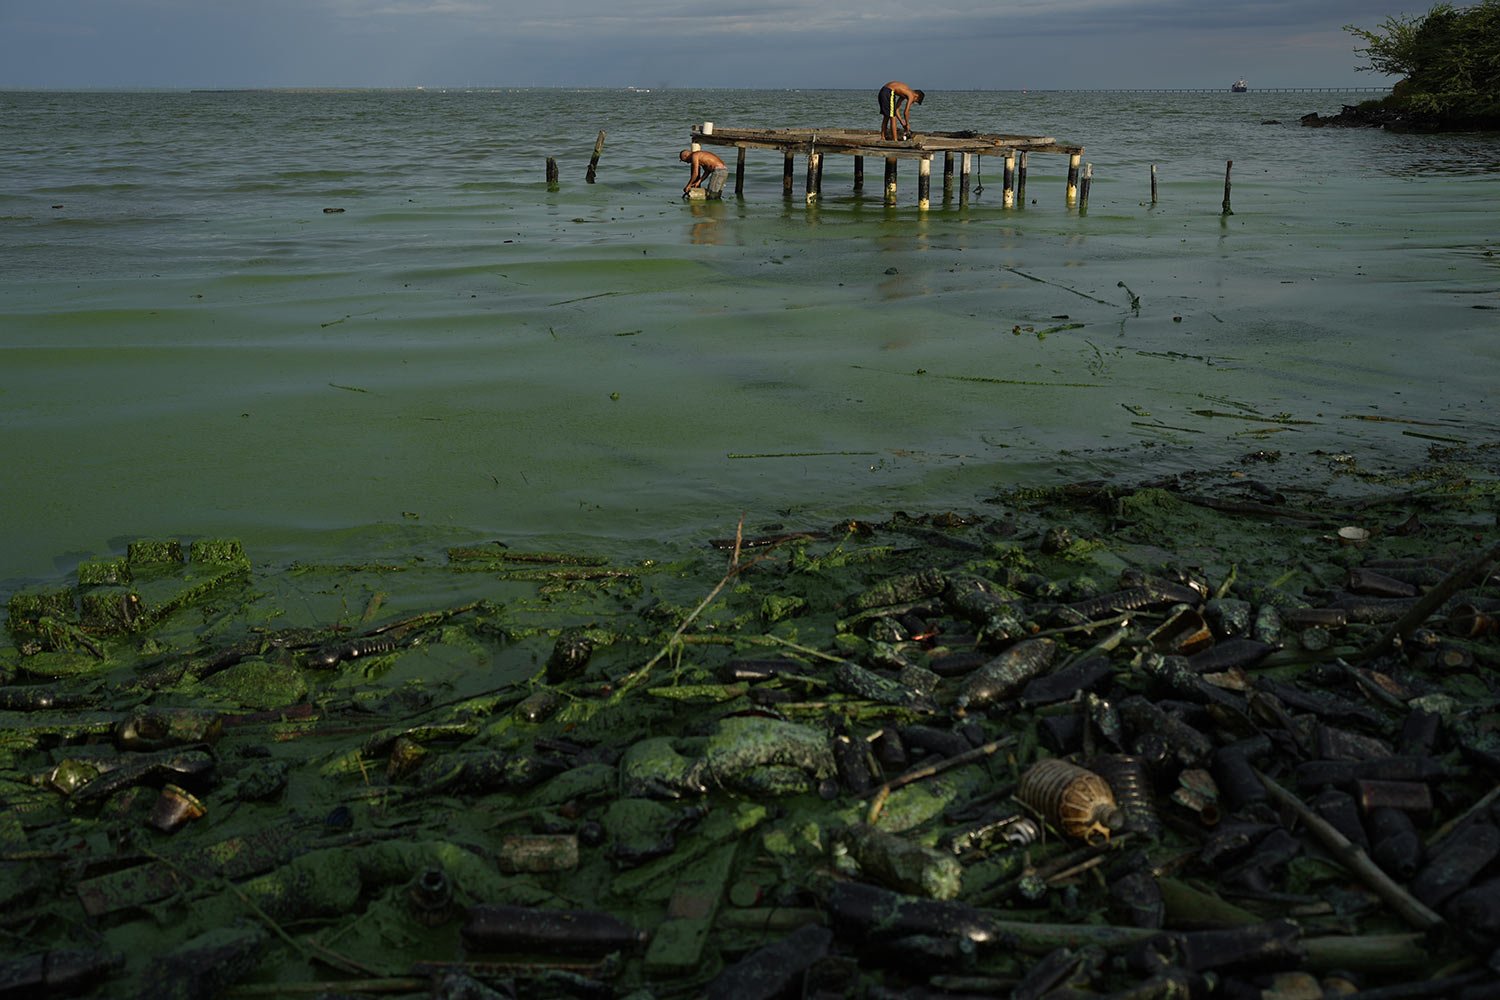  A thick greenish film covers trash and plastics polluting the waters of Lake Maracaibo, as fishermen prepare their bait in the background, in Maracaibo, Venezuela, Aug. 10, 2023. (AP Photo/Ariana Cubillos) 